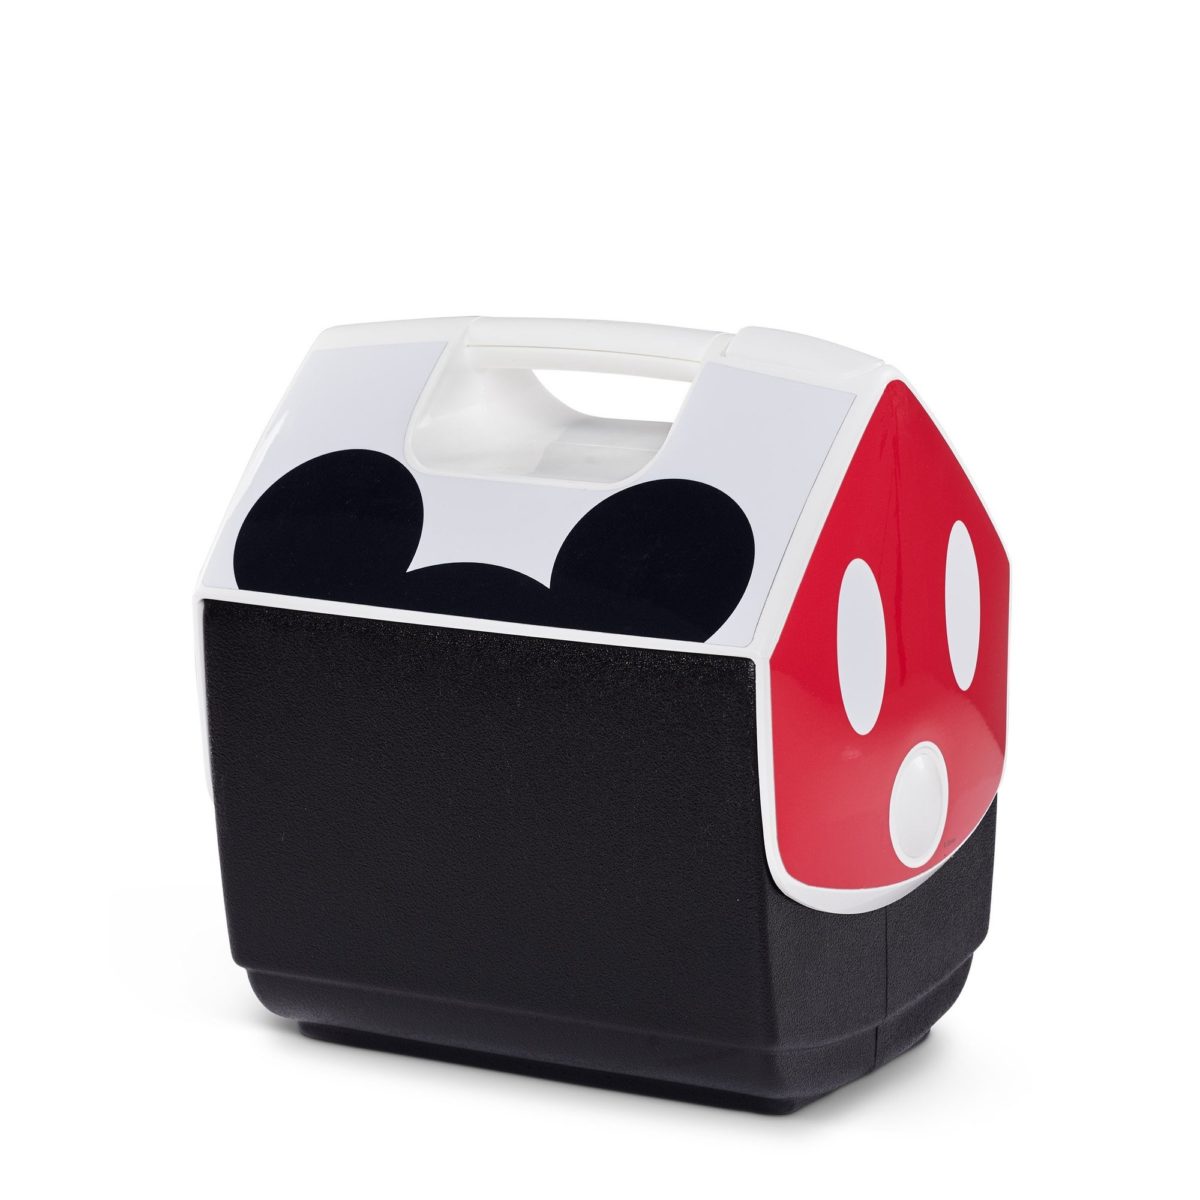 Disney and Igloo have teamed up to release all-new Playmate coolers